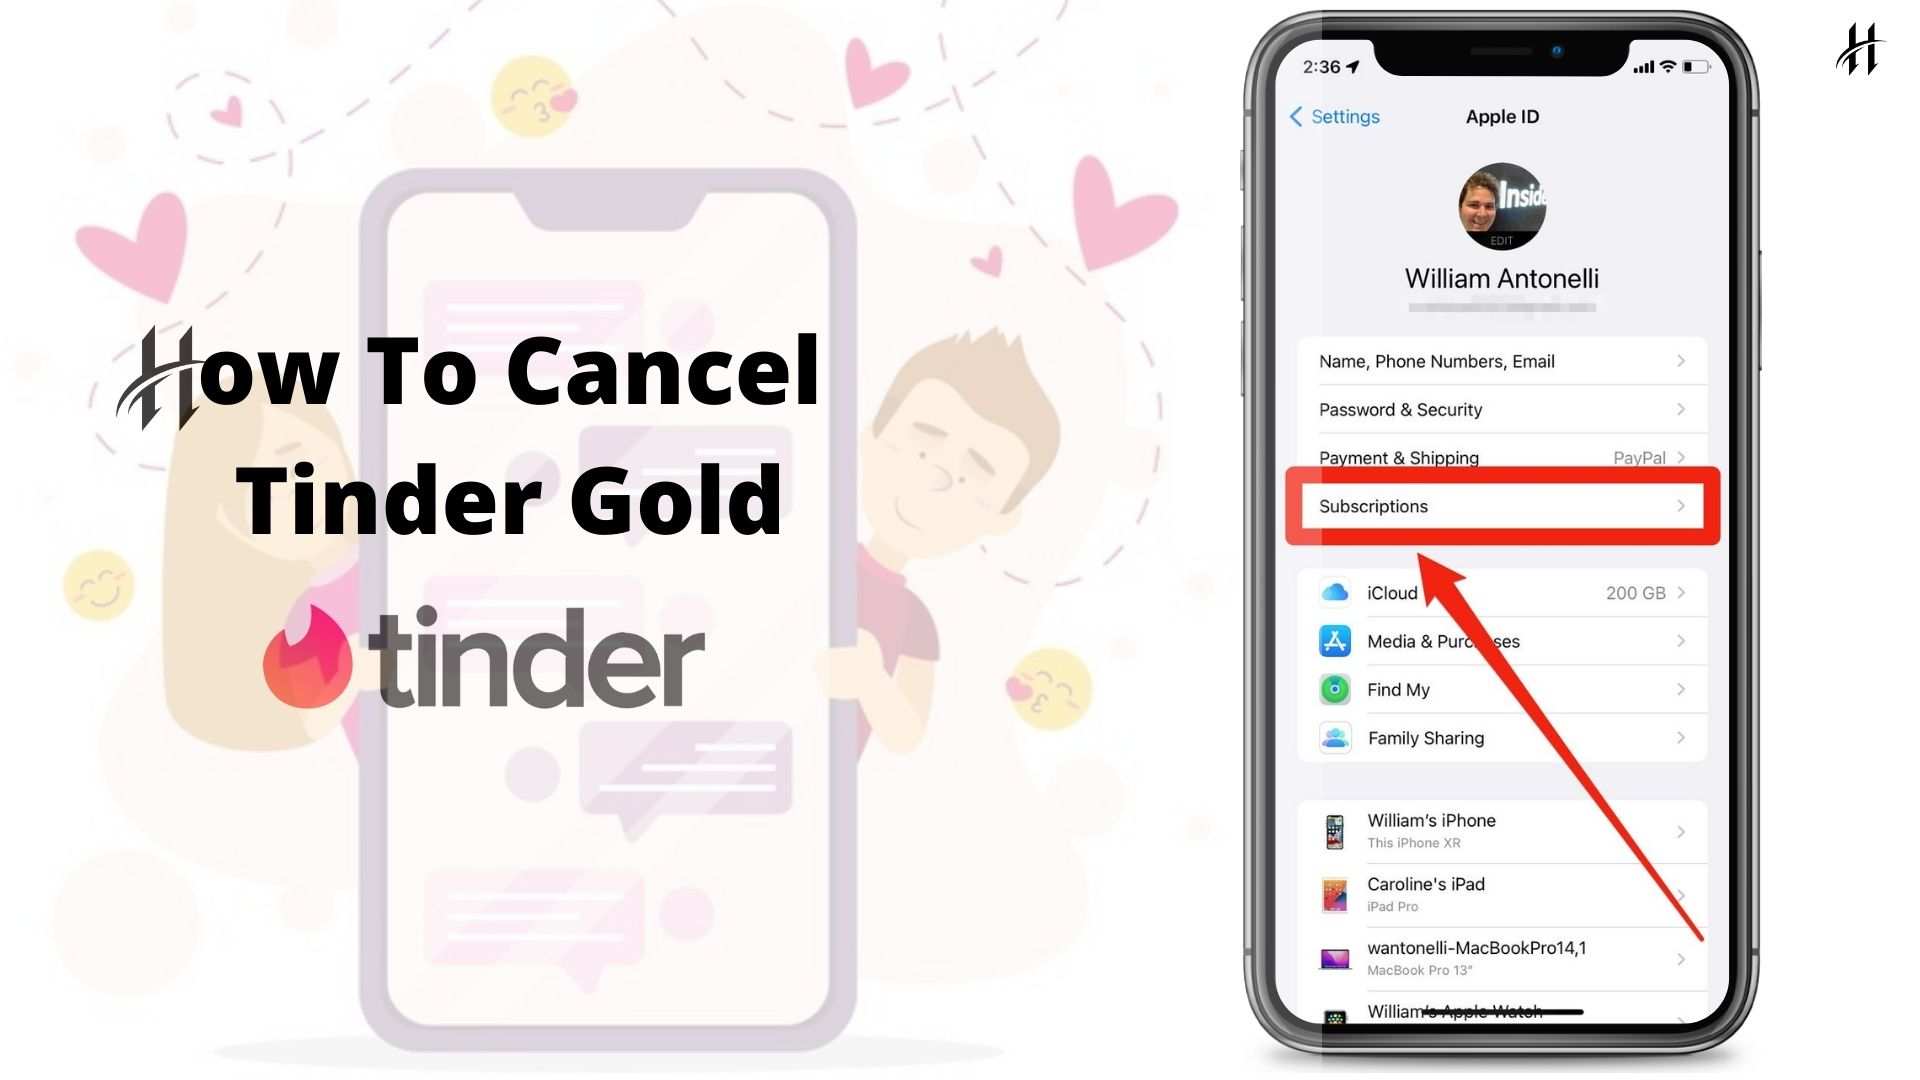 How To Cancel Tinder Gold